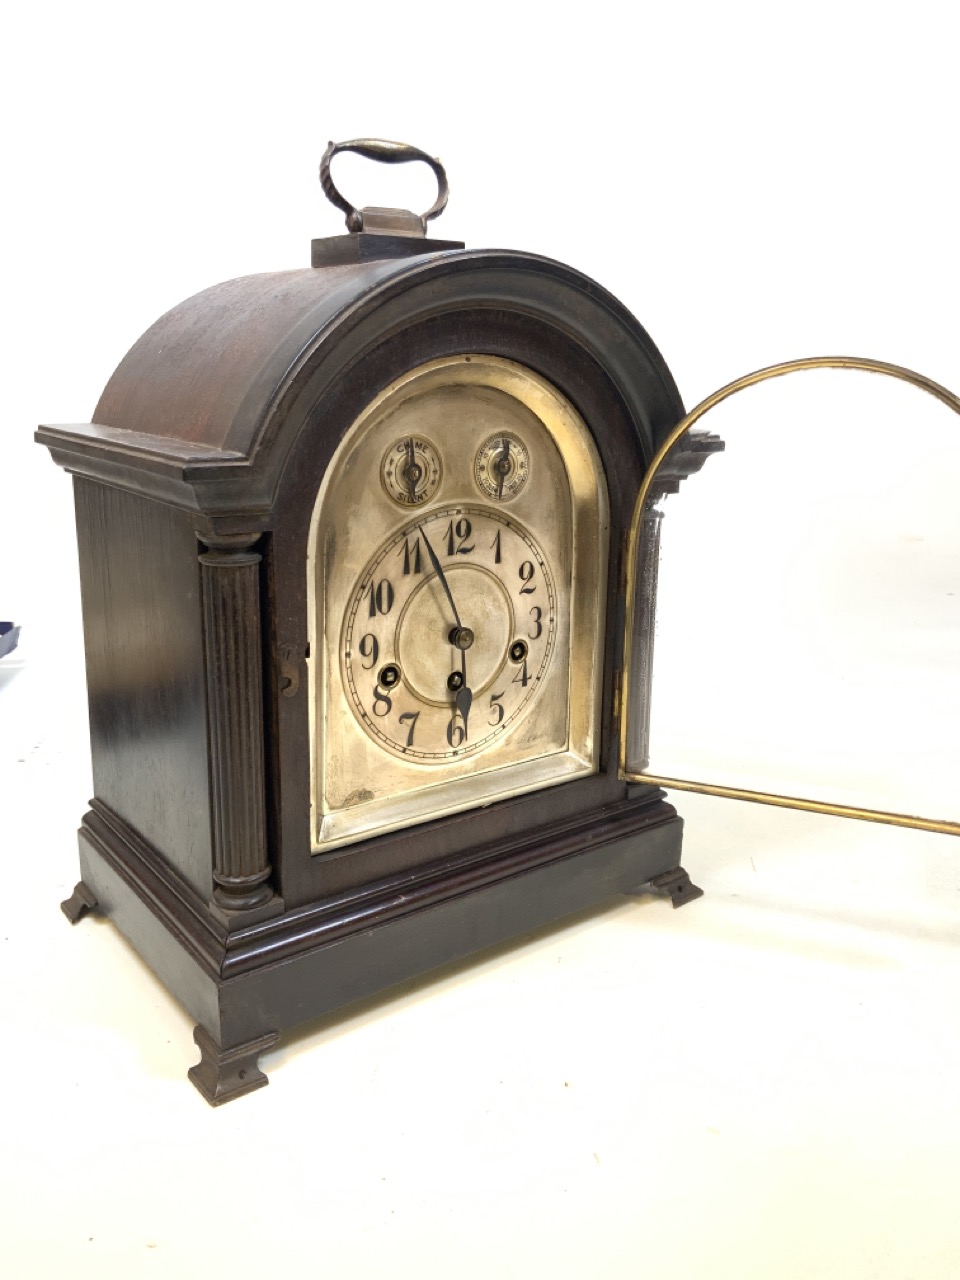 A Large wooden mantle clock marked Junghams Wurttemberg b21 inside. With silvered face. - Image 2 of 6